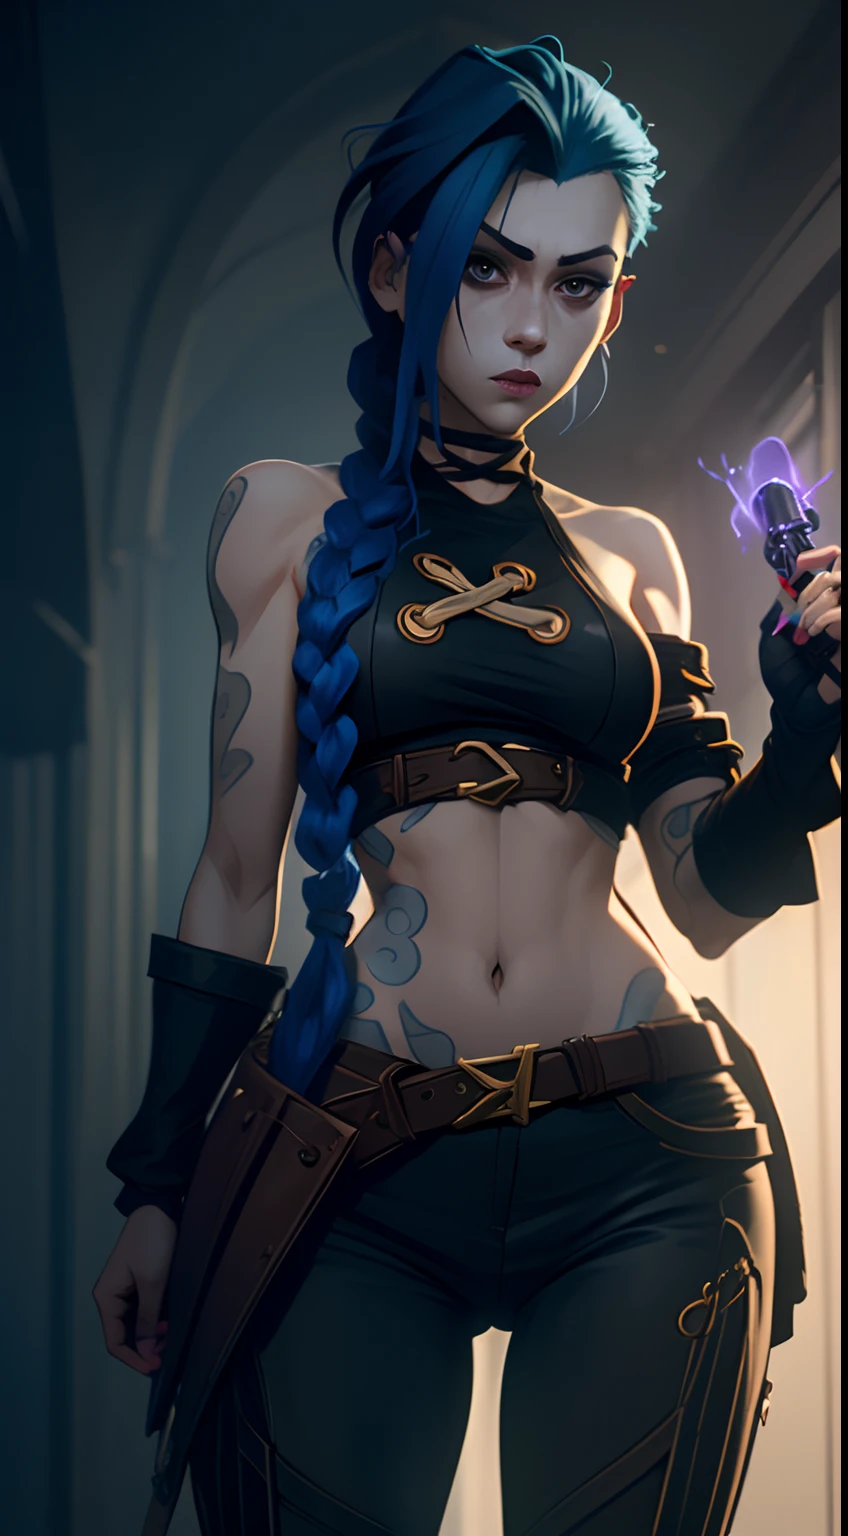 Jinx's character design, Dynamic movements, lying naked on her back, bare breast, covers the chest with his hands, Swollen , butt, kitty, sexypose, Beautiful figure, Arcane's Jinx, Bright blue and purple sparks all around, glowing eyes, Pink glowing eyes, hairlong, hairsh, braided into long braids, Pigtails hang below the knee, Hair color changes from bright blue to navy blue, Dressed in brown breeches, Leather boots on the feet, Top with four gold circles on the chest in the middle of the chest, Blue cloud tattoos on shoulders and waist, Long bangs, hanging on the right side, Belt with cartridges on the belt, Arcane style, extremely detailed CG unity 8k wallpaper, detailed light, Cinematic lighting, chromatic aberration, glittering, expressionless, epic composition, dark in the background, Cherecter Desing, Very detailed, Detailed body, Vibrants, Detailed Face, sharp-focus, anime art, Vibrants, Detailed Face, Hugh Details, sharp-focus, Very drooping face, A detailed eye, super fine illustration, better shadow, finely detail, Beautiful detailed glow, Beautiful detailed, Extremely detailed, expressionless, epic composition,